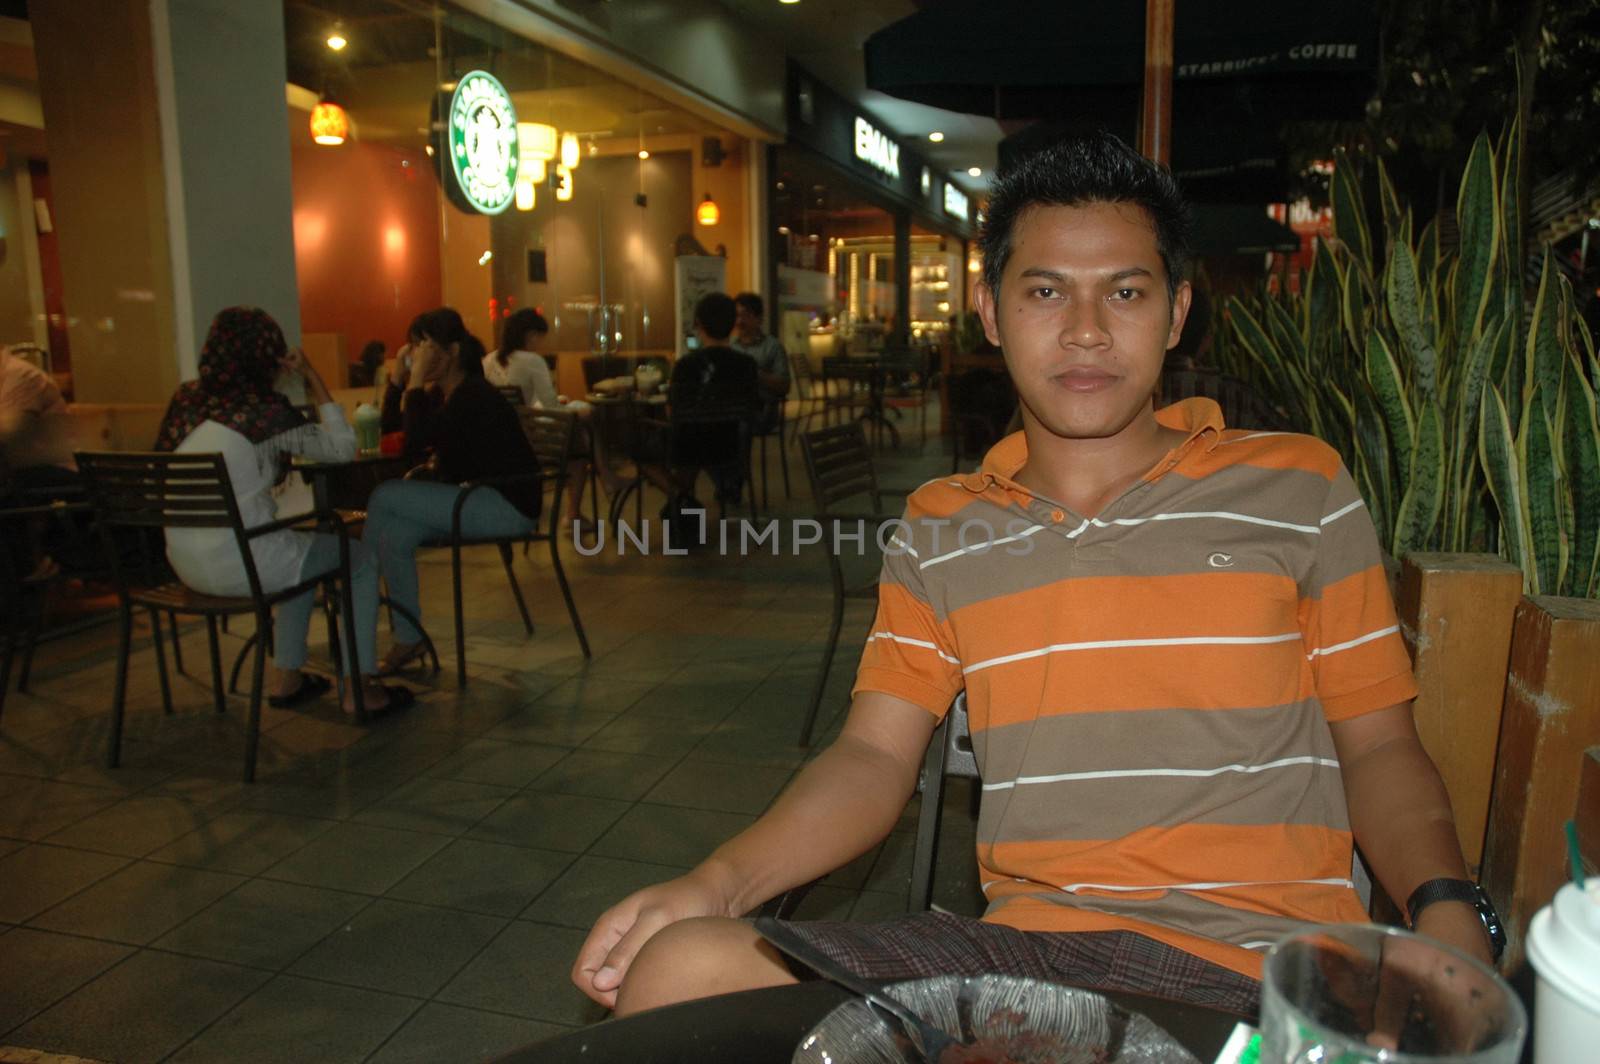 Bandung, Indonesia - July 2, 2011: Young man sit down on chair beside starbuck cafe.